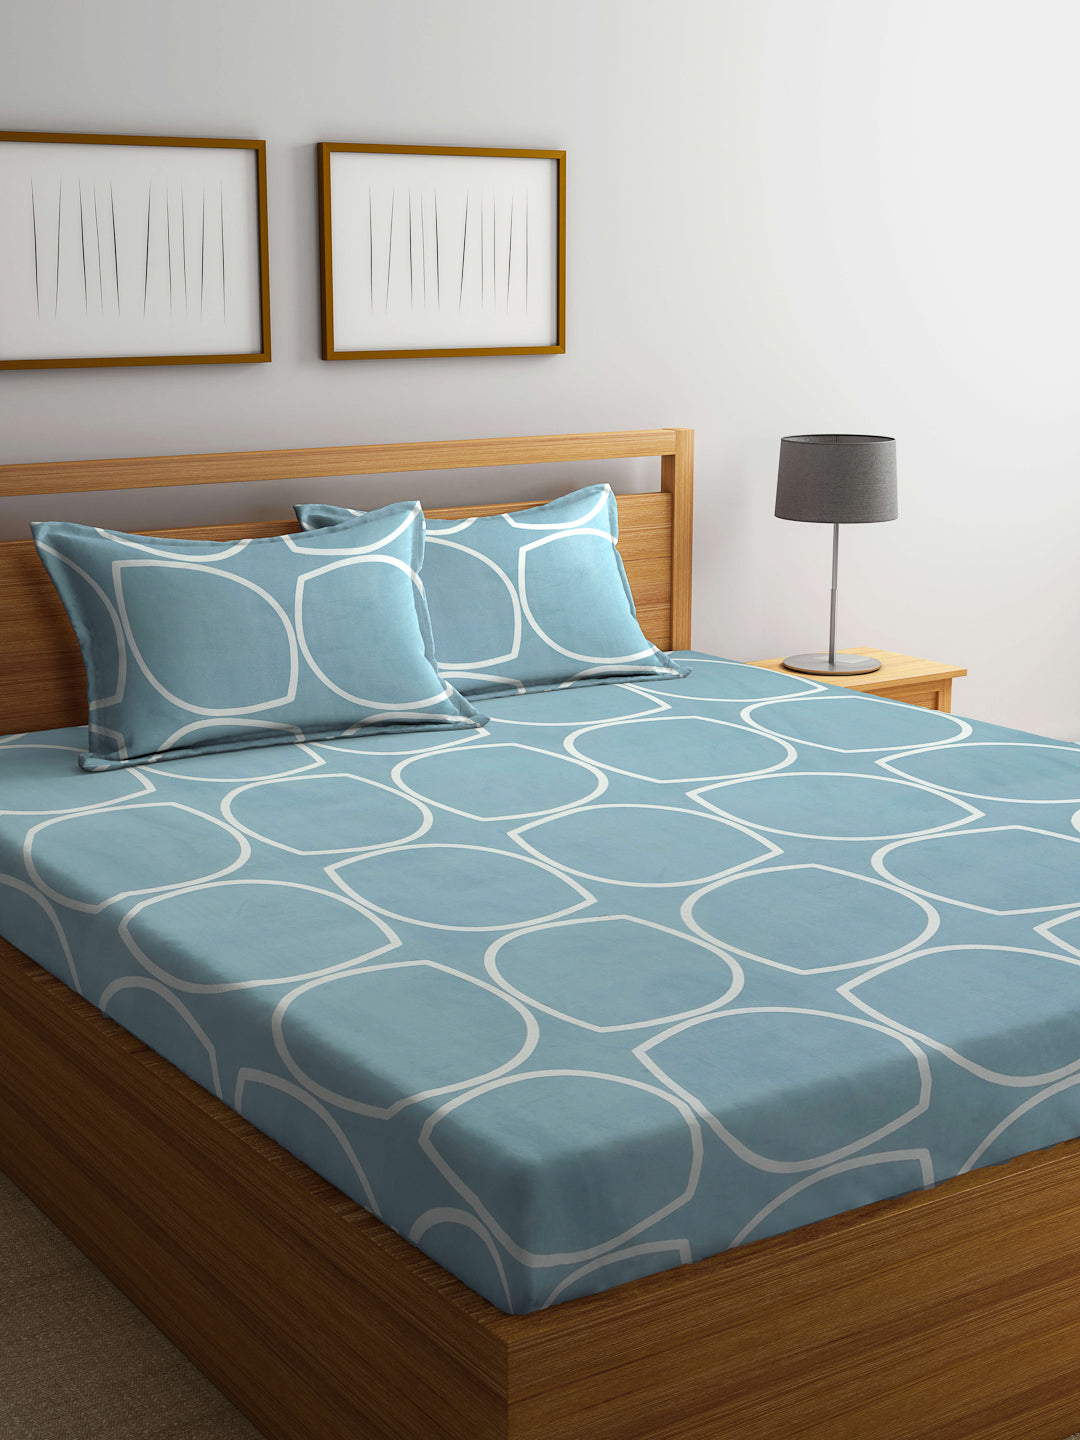 Klotthe SkyBlue Geometric 300 TC Cotton Blend Fitted Double Bedsheet in Book Fold Packing